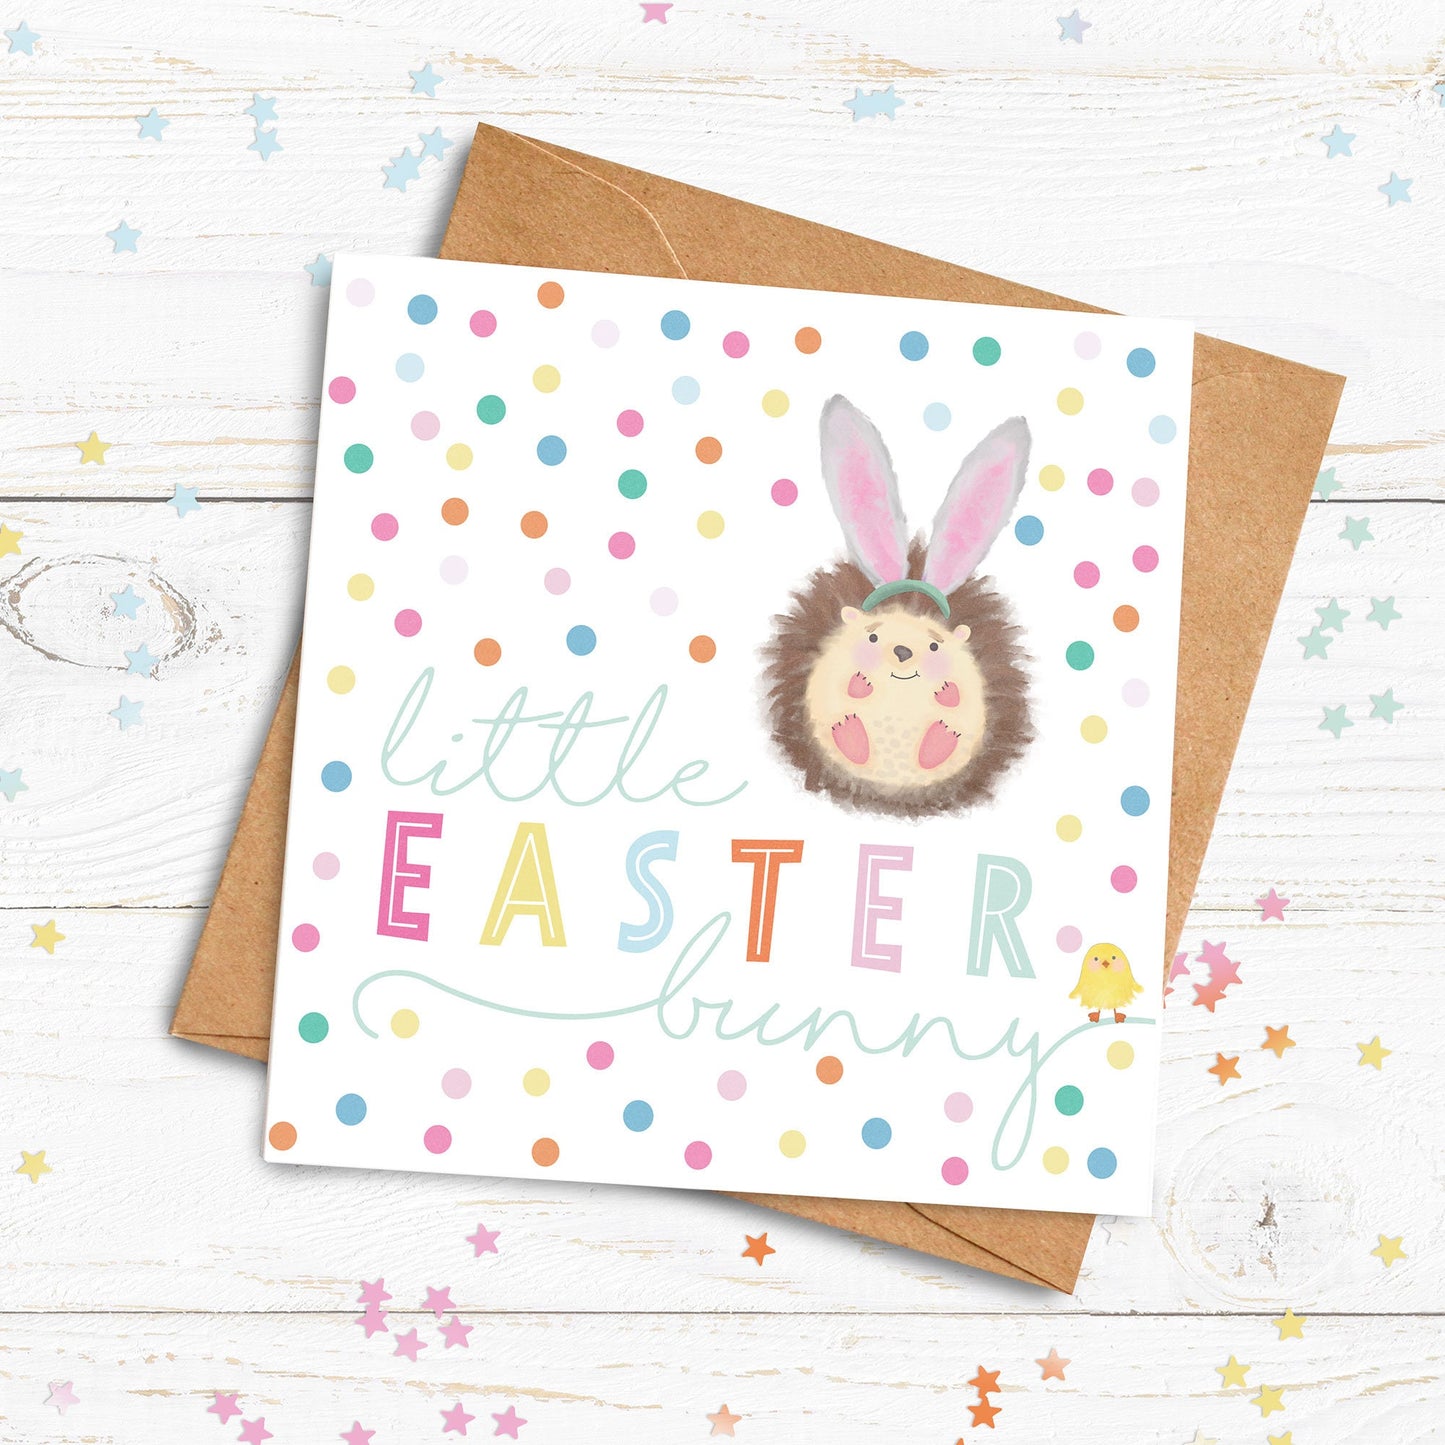 Little Easter Bunny Personalised Card. First Easter Card. Personalised Baby Card. Cute Hedgehog Card. Send Direct Option.